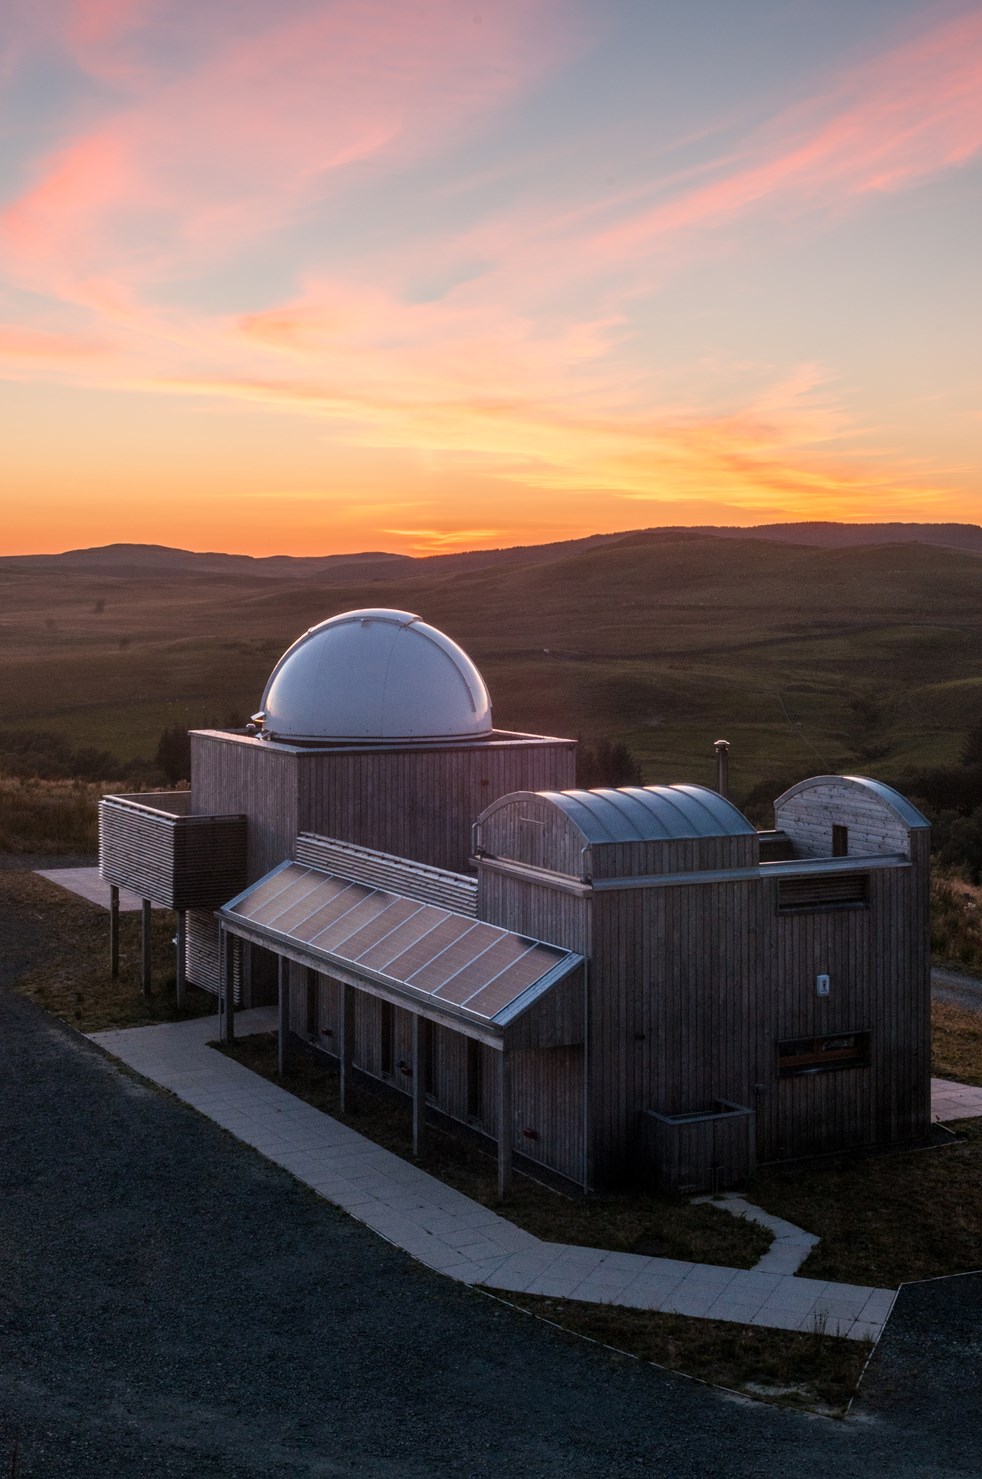 Dark Sky Observatory to rise from the ashes